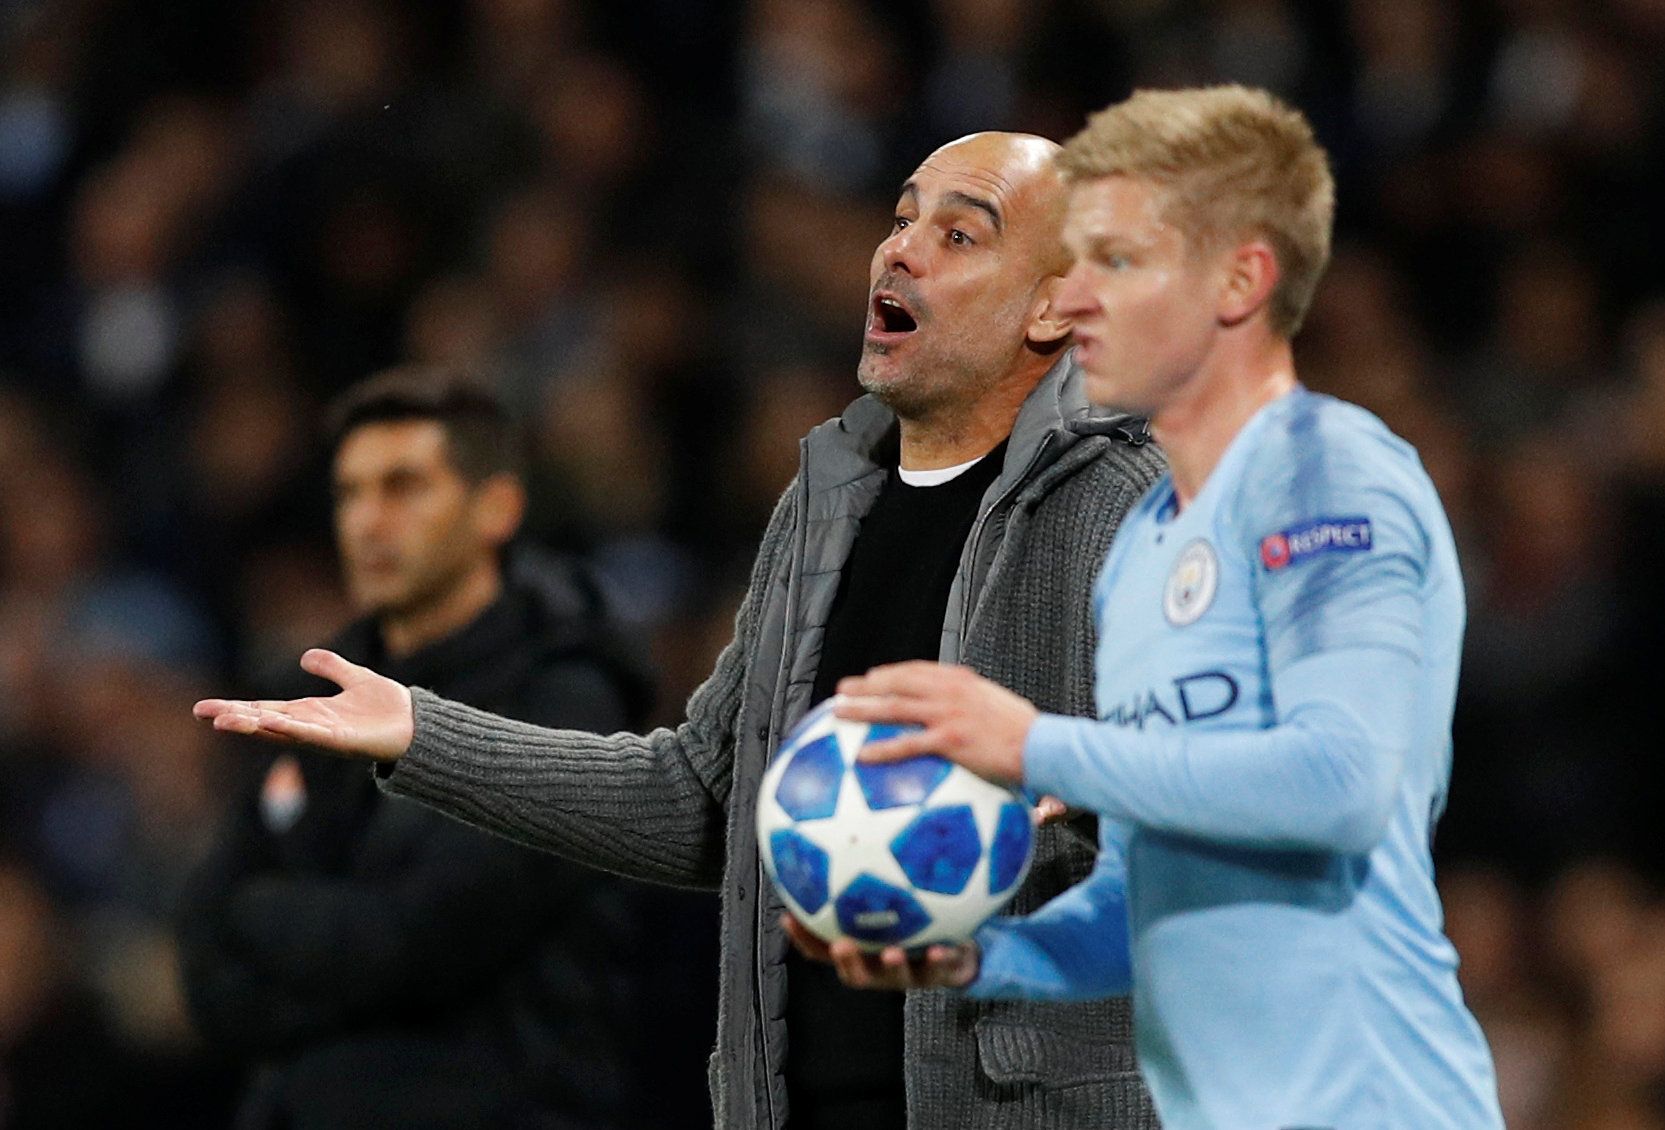 Soccer Football - Champions League - Group Stage - Group F - Manchester City v Shakhtar Donetsk - Etihad Stadium, Manchester, Britain - November 7, 2018  Manchester City manager Pep Guardiola reacts as Oleksandr Zinchenko prepares to take a throw in  REUTERS/Darren Staples